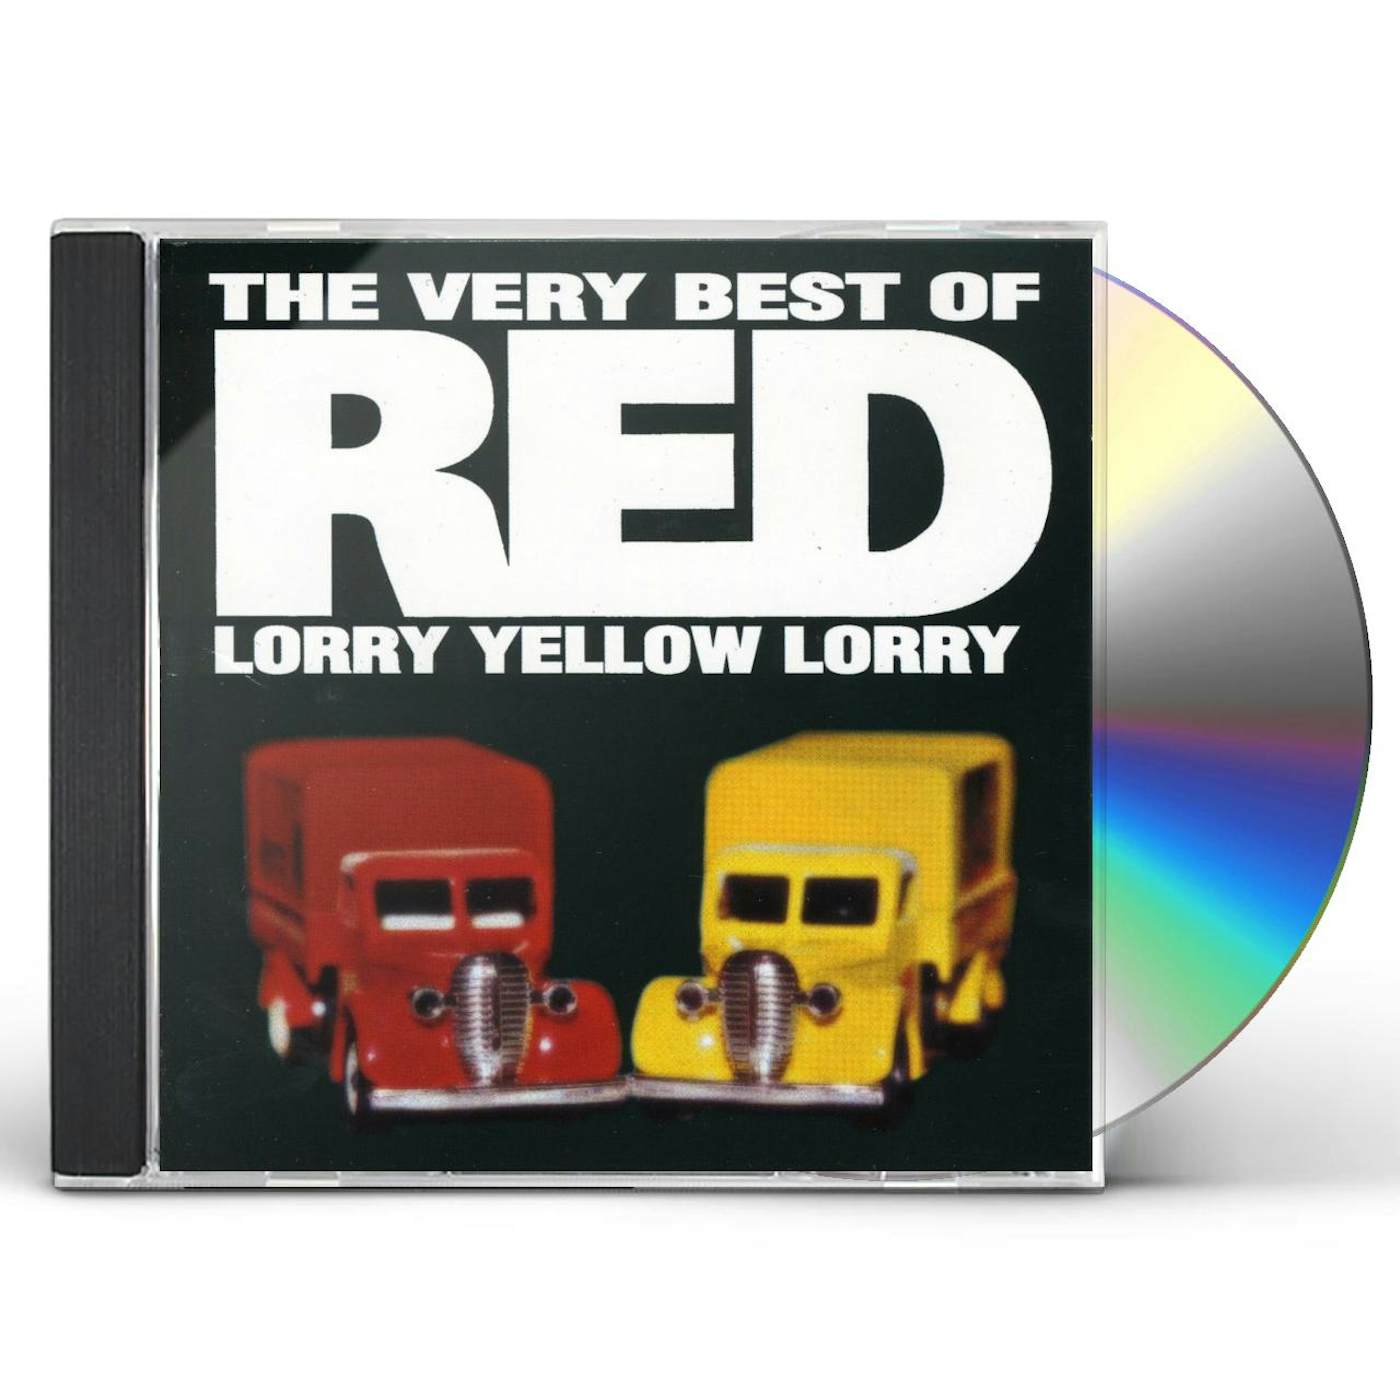 VERY BEST OF RED LORRY YELLOW LORRY CD